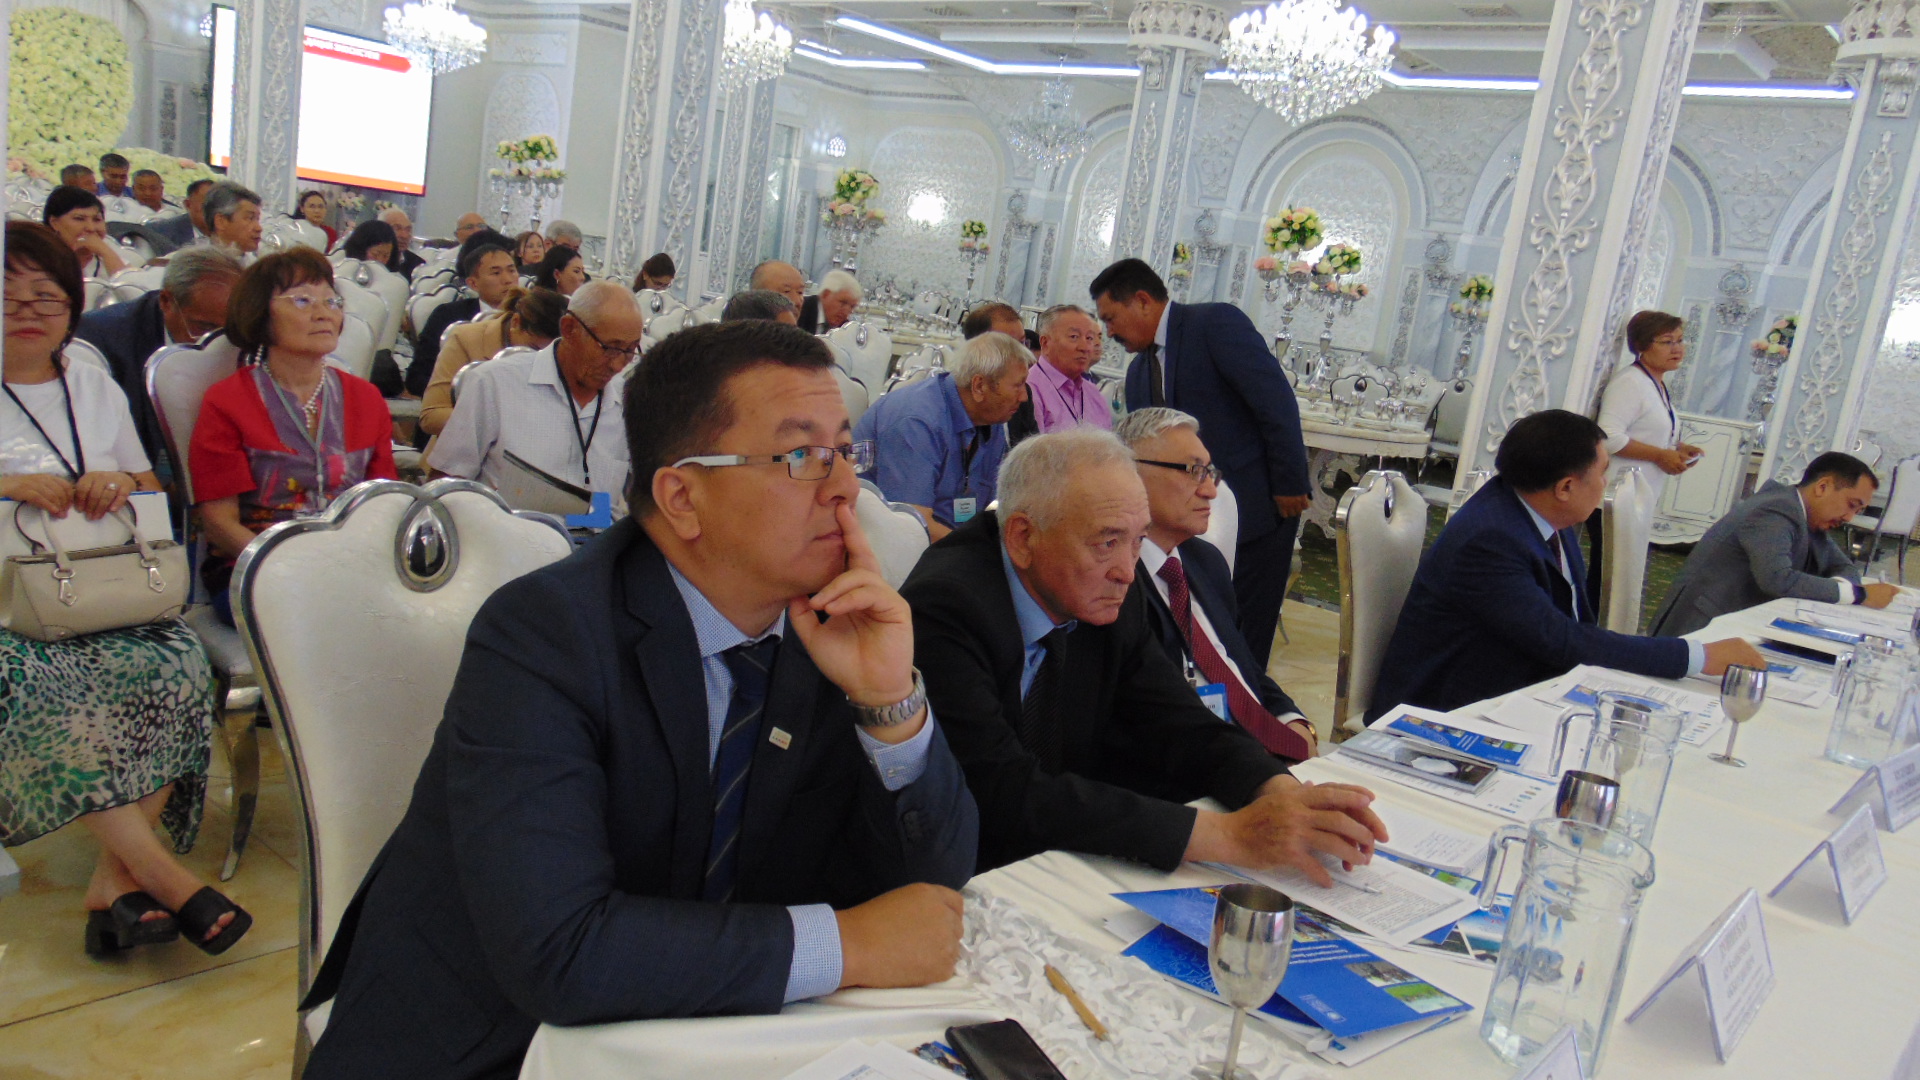 Representatives of Kazakhstan and Kyrgyzstan discussed water sharing in the Chu-Talas basin at a conference in Taraz